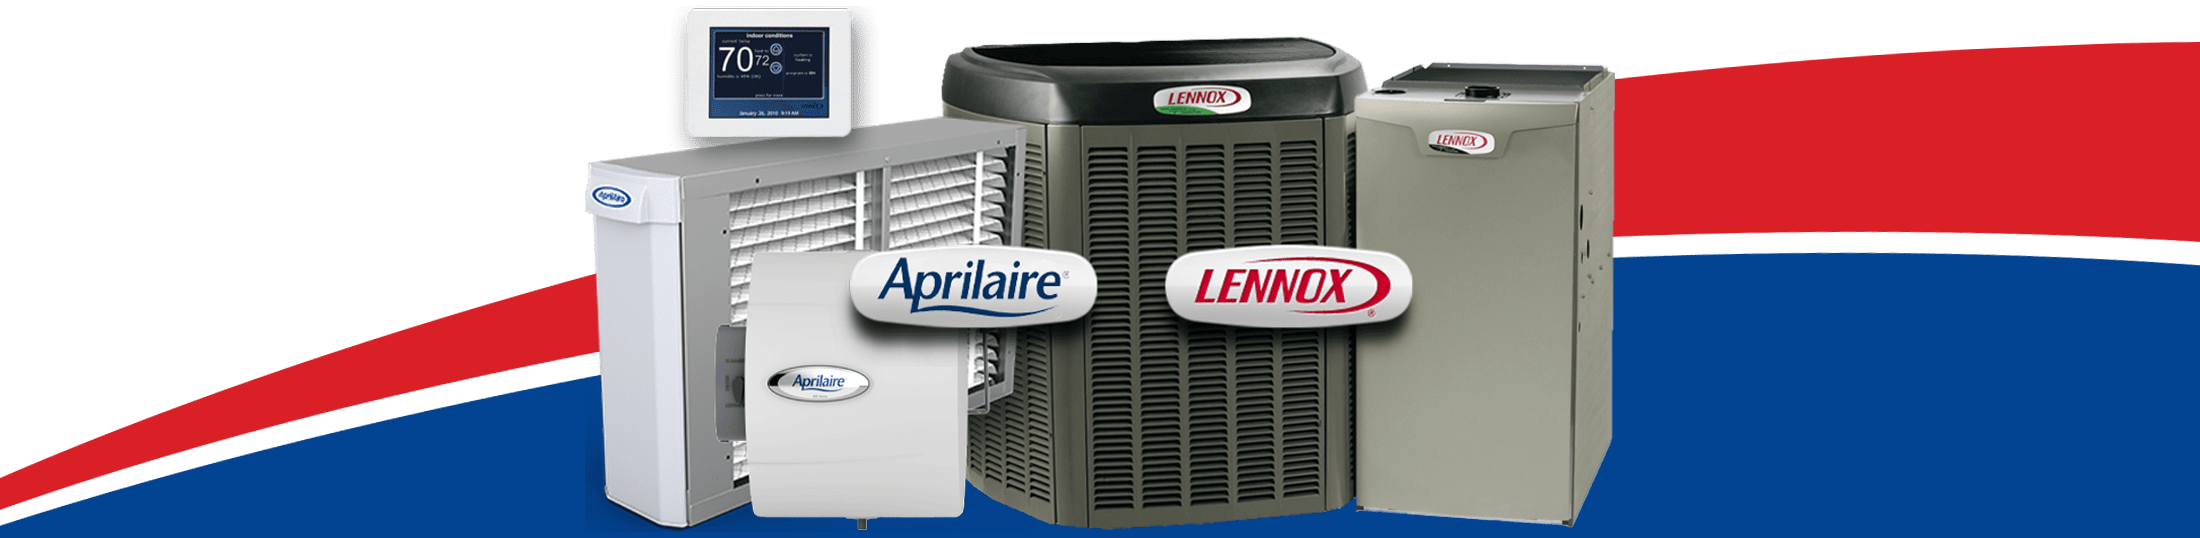 Accu-Temp Heating & Air Conditioning works with Aprilaire & Lennox Furnaces in Brighton MI.